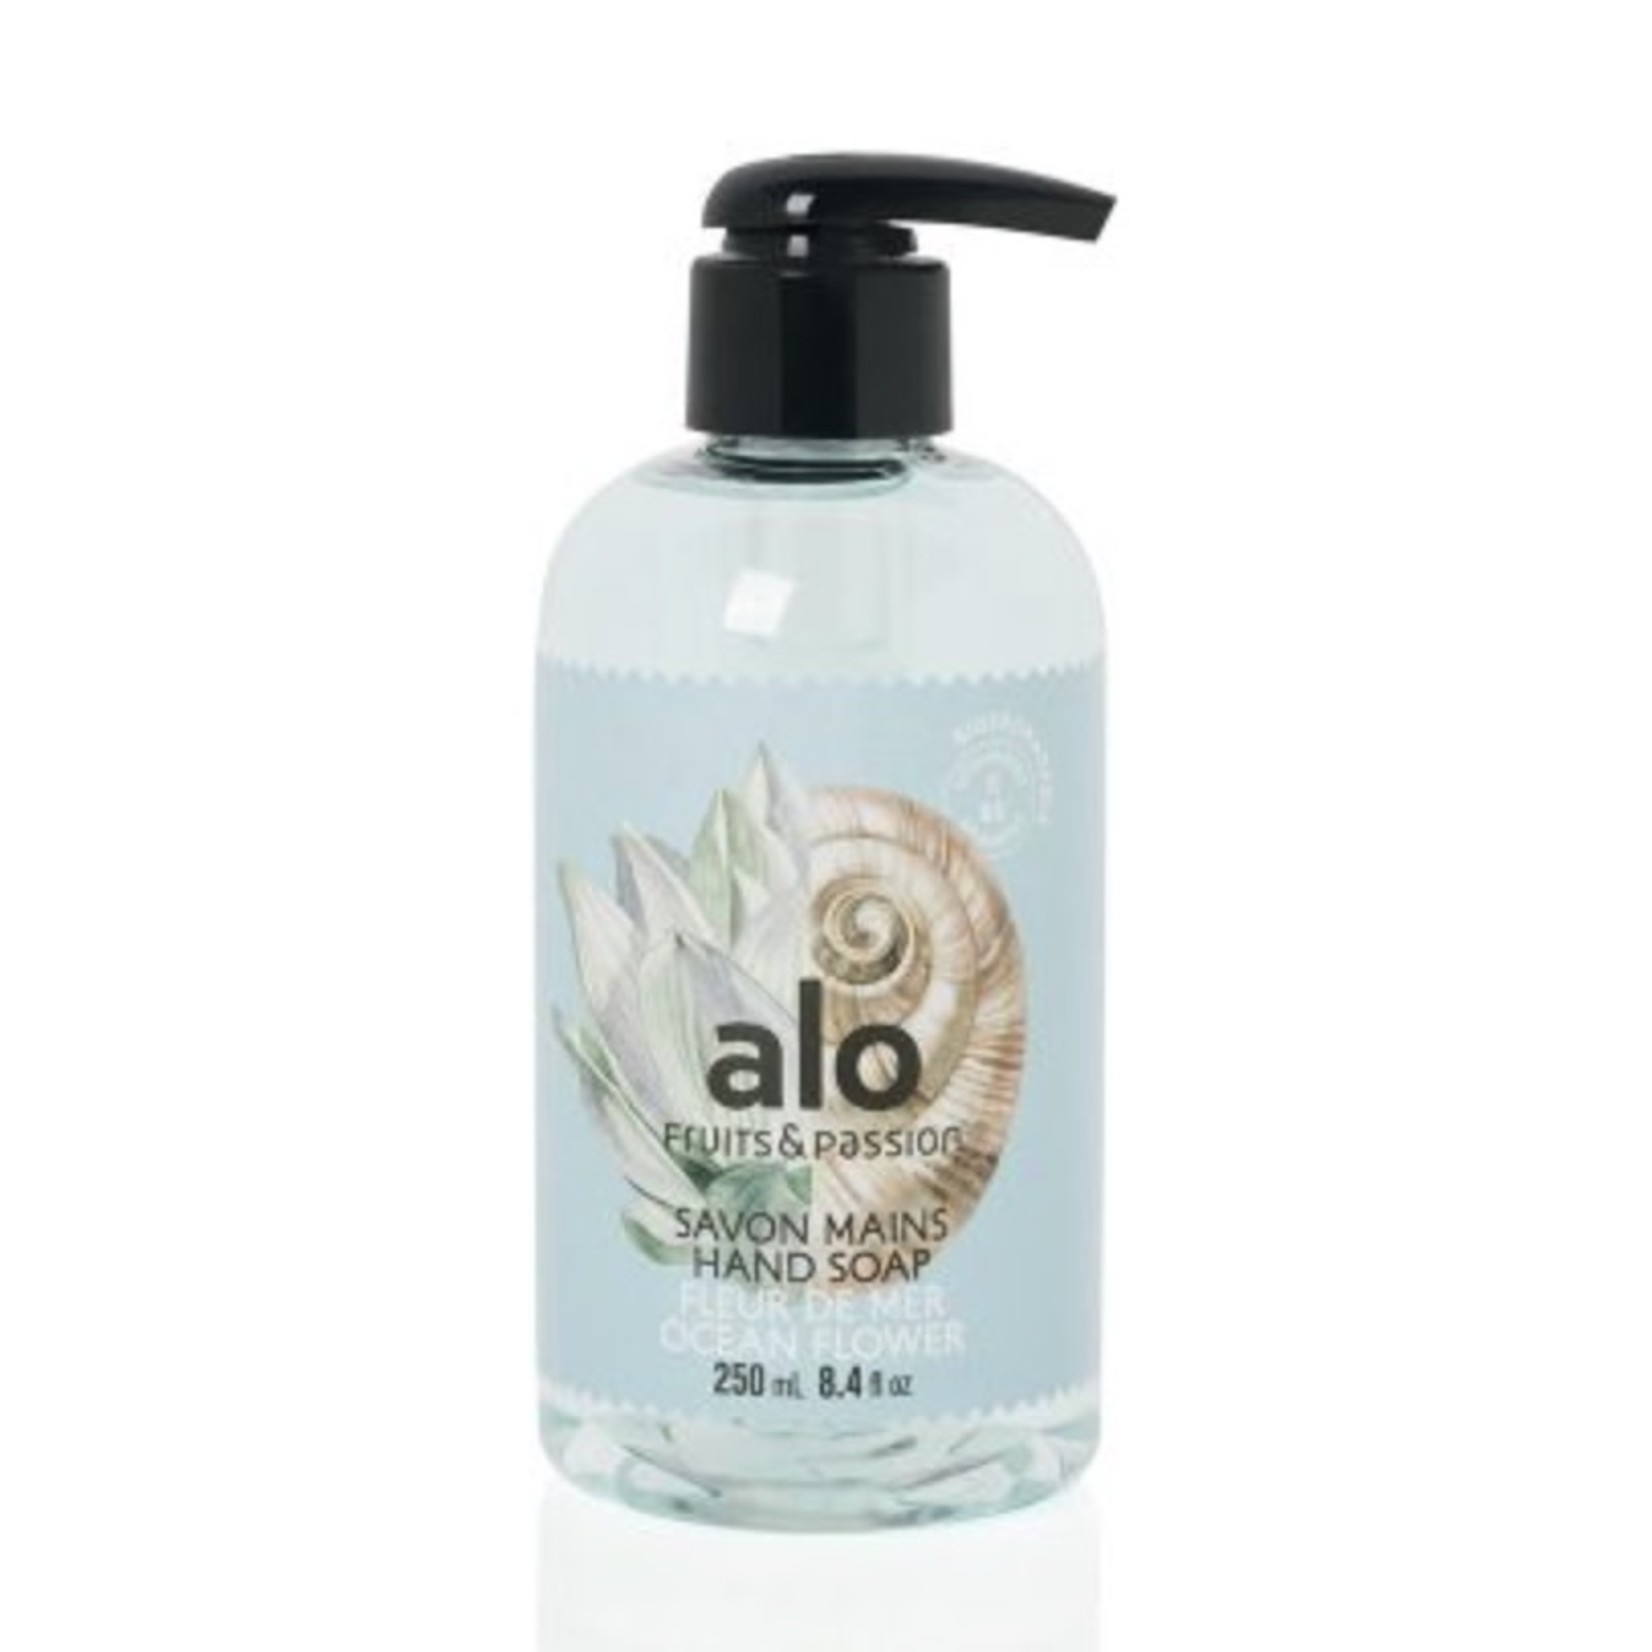 ALO FRUITS & PASSION FRUITS & PASSION Hand Soap 250ml - Ocean Flower DNR